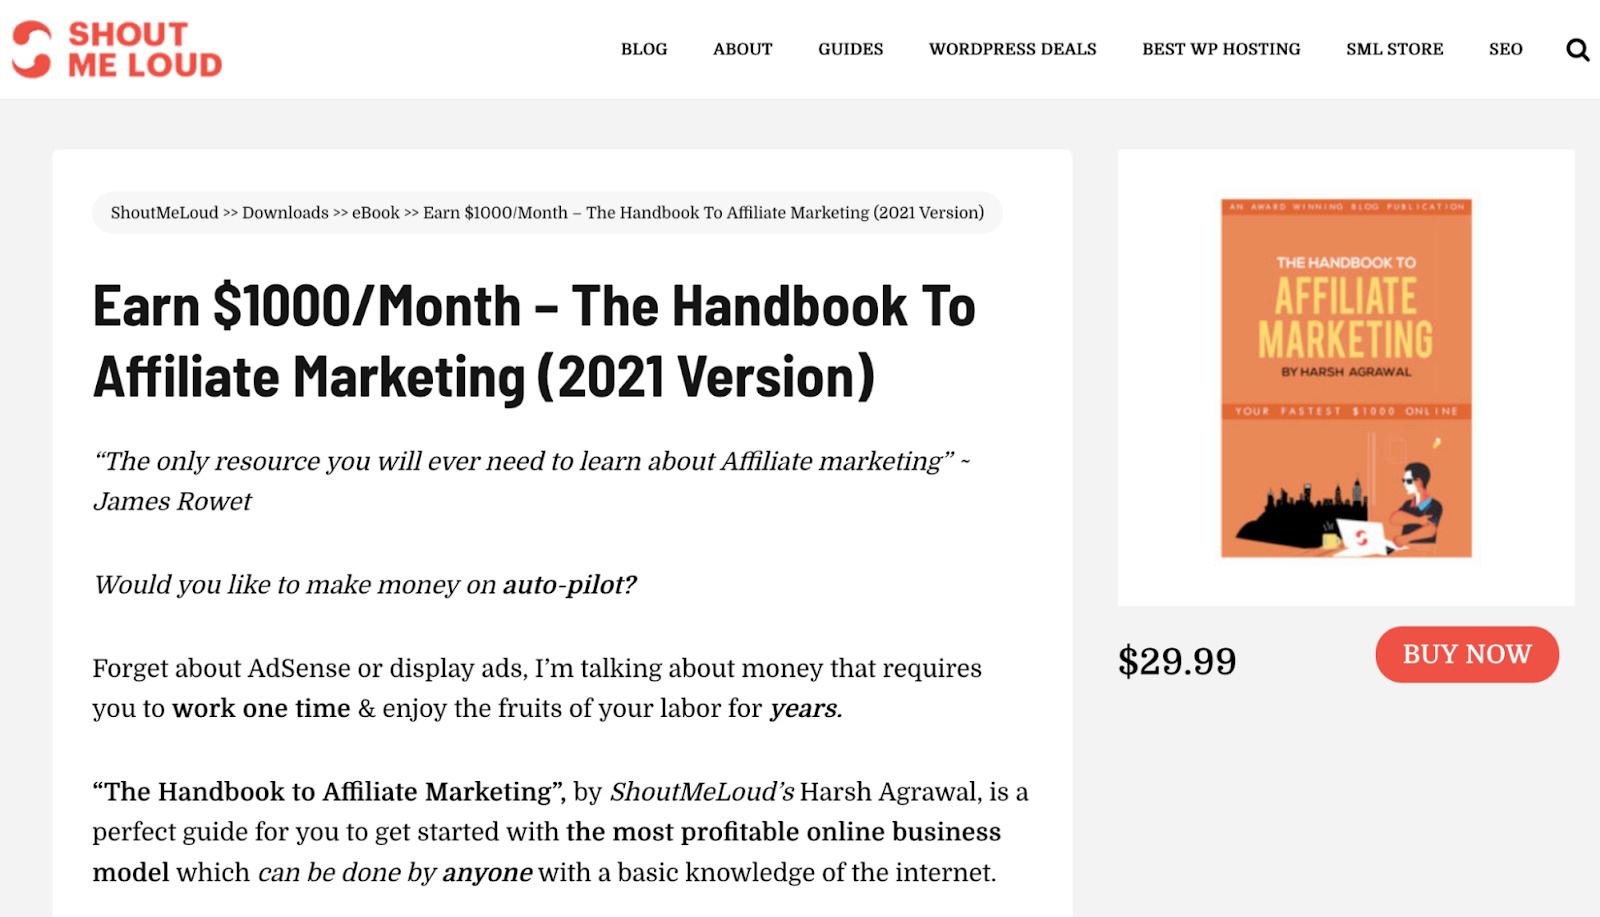 Page about ShoutMeLoud's ebook, "The Handbook to Affiliate Marketing"